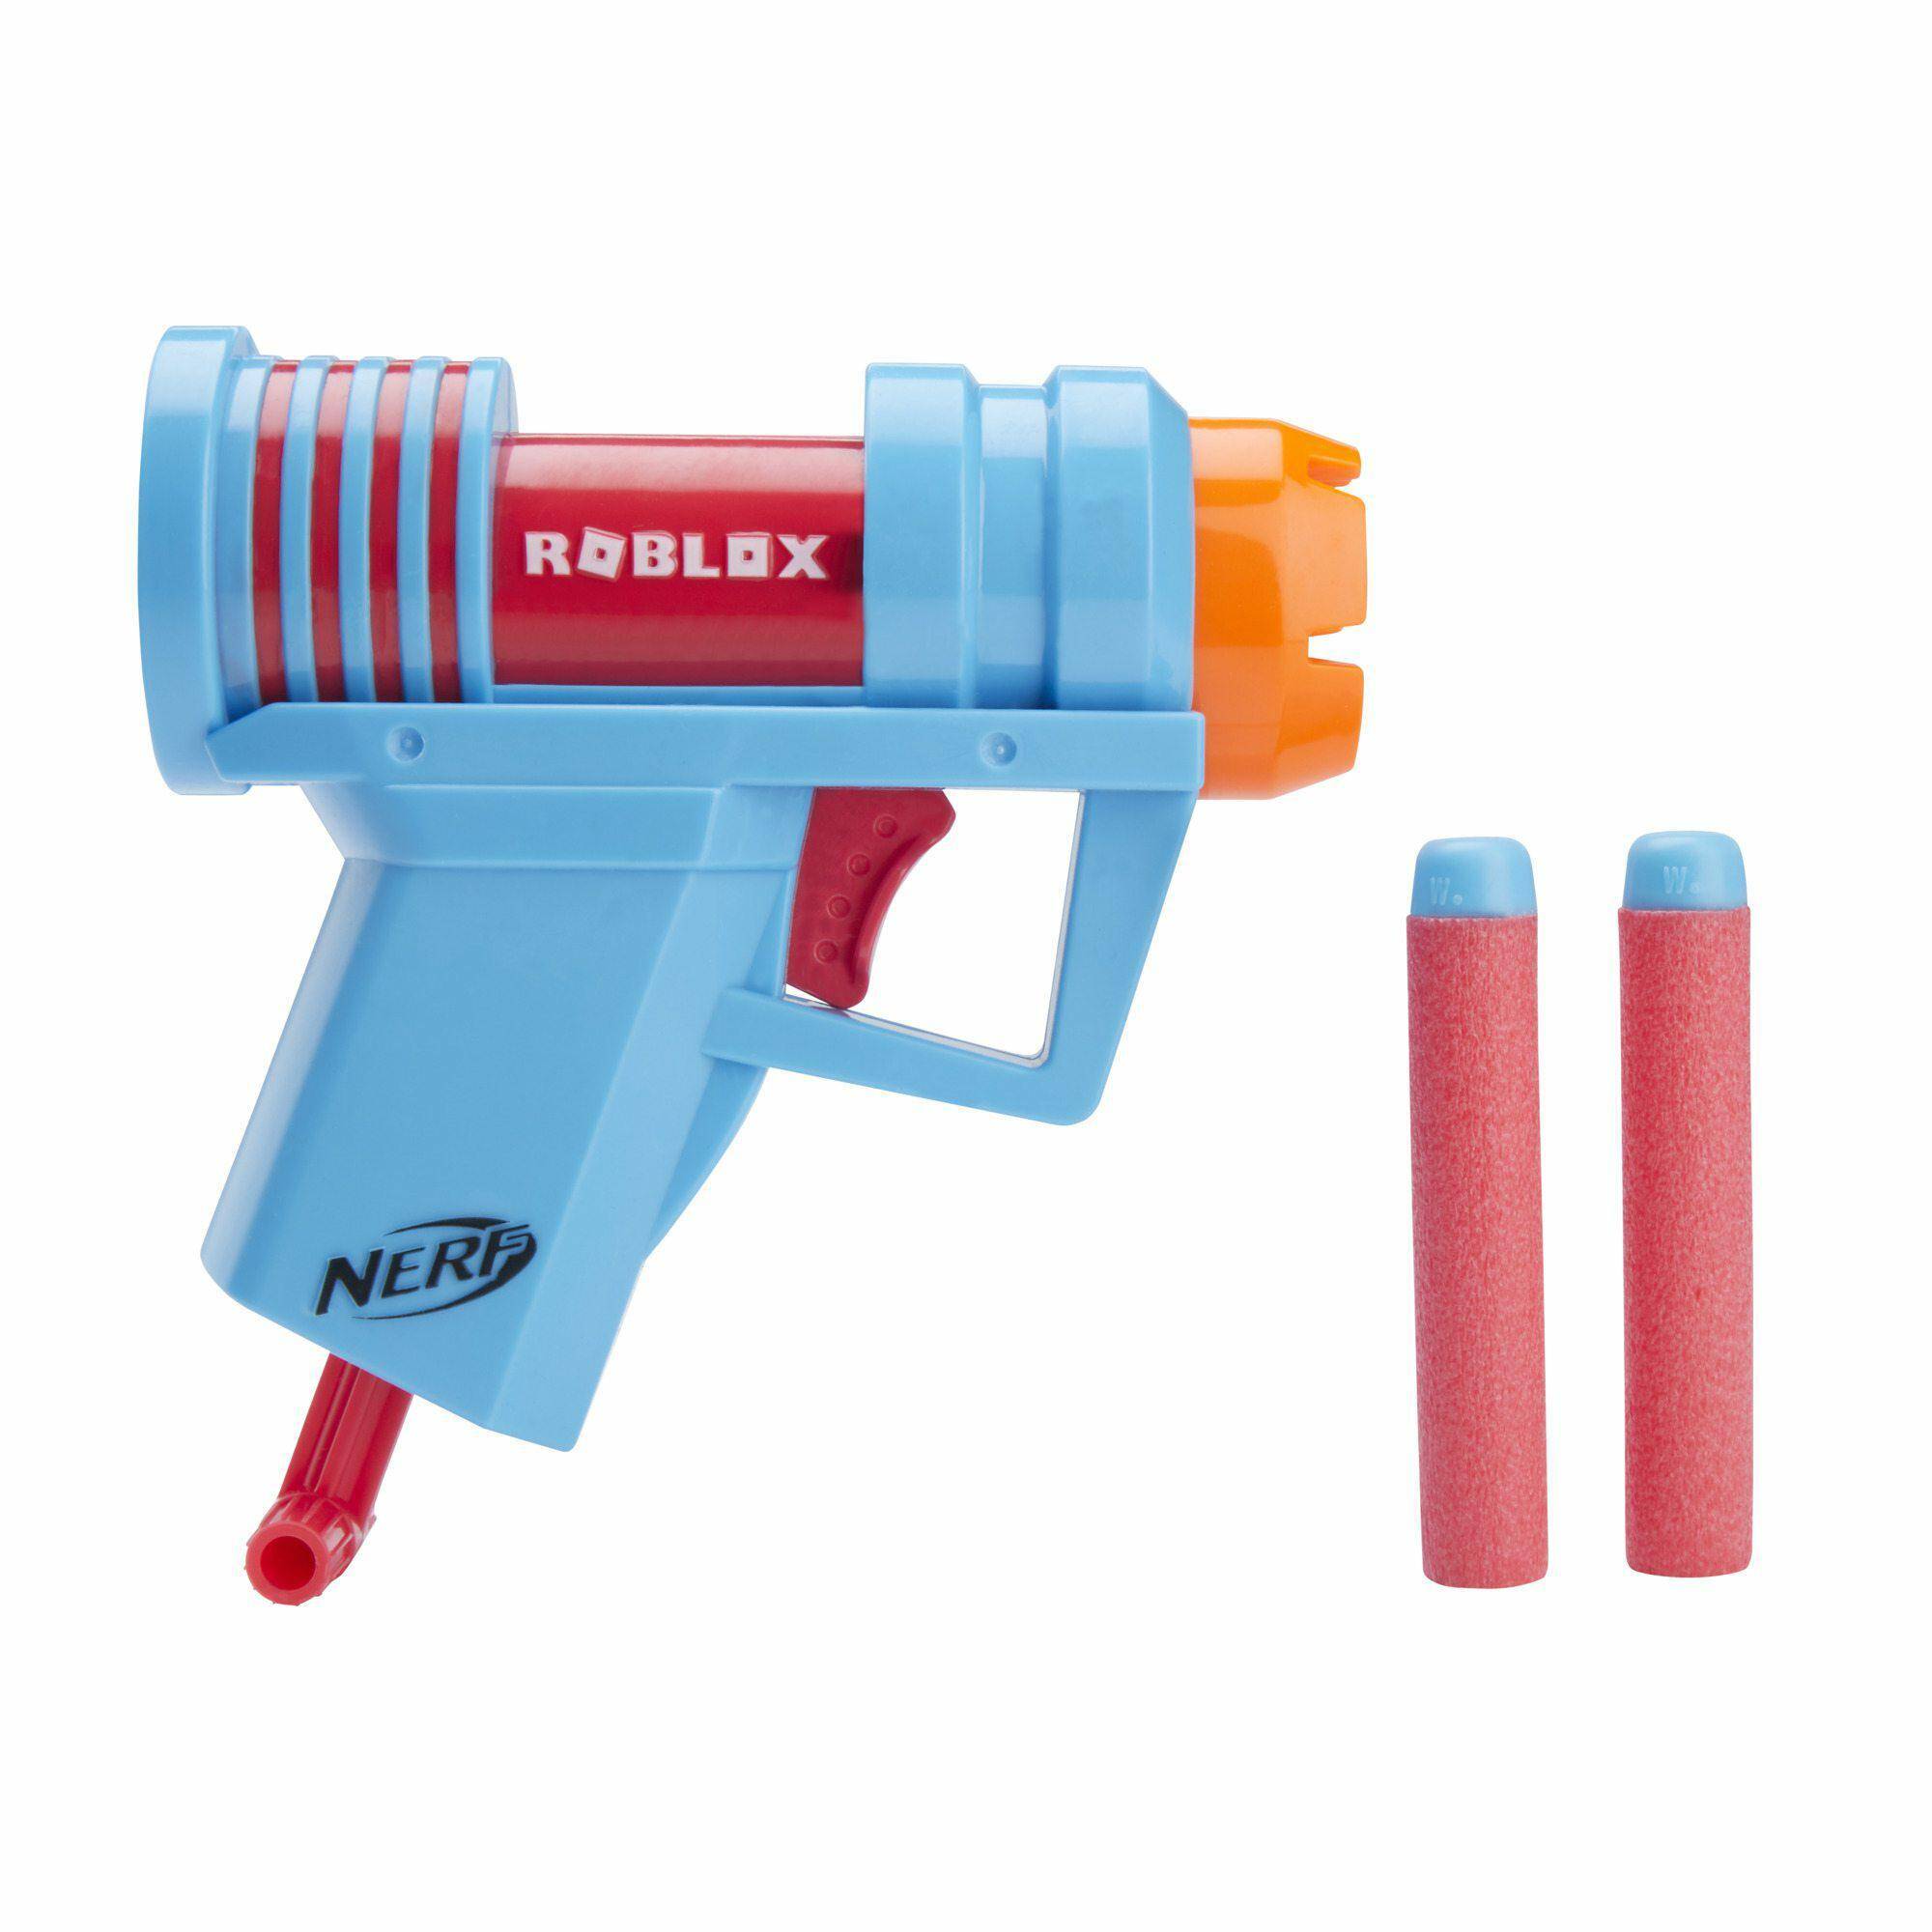 HS NERF ROBLOX MADCITY F2490